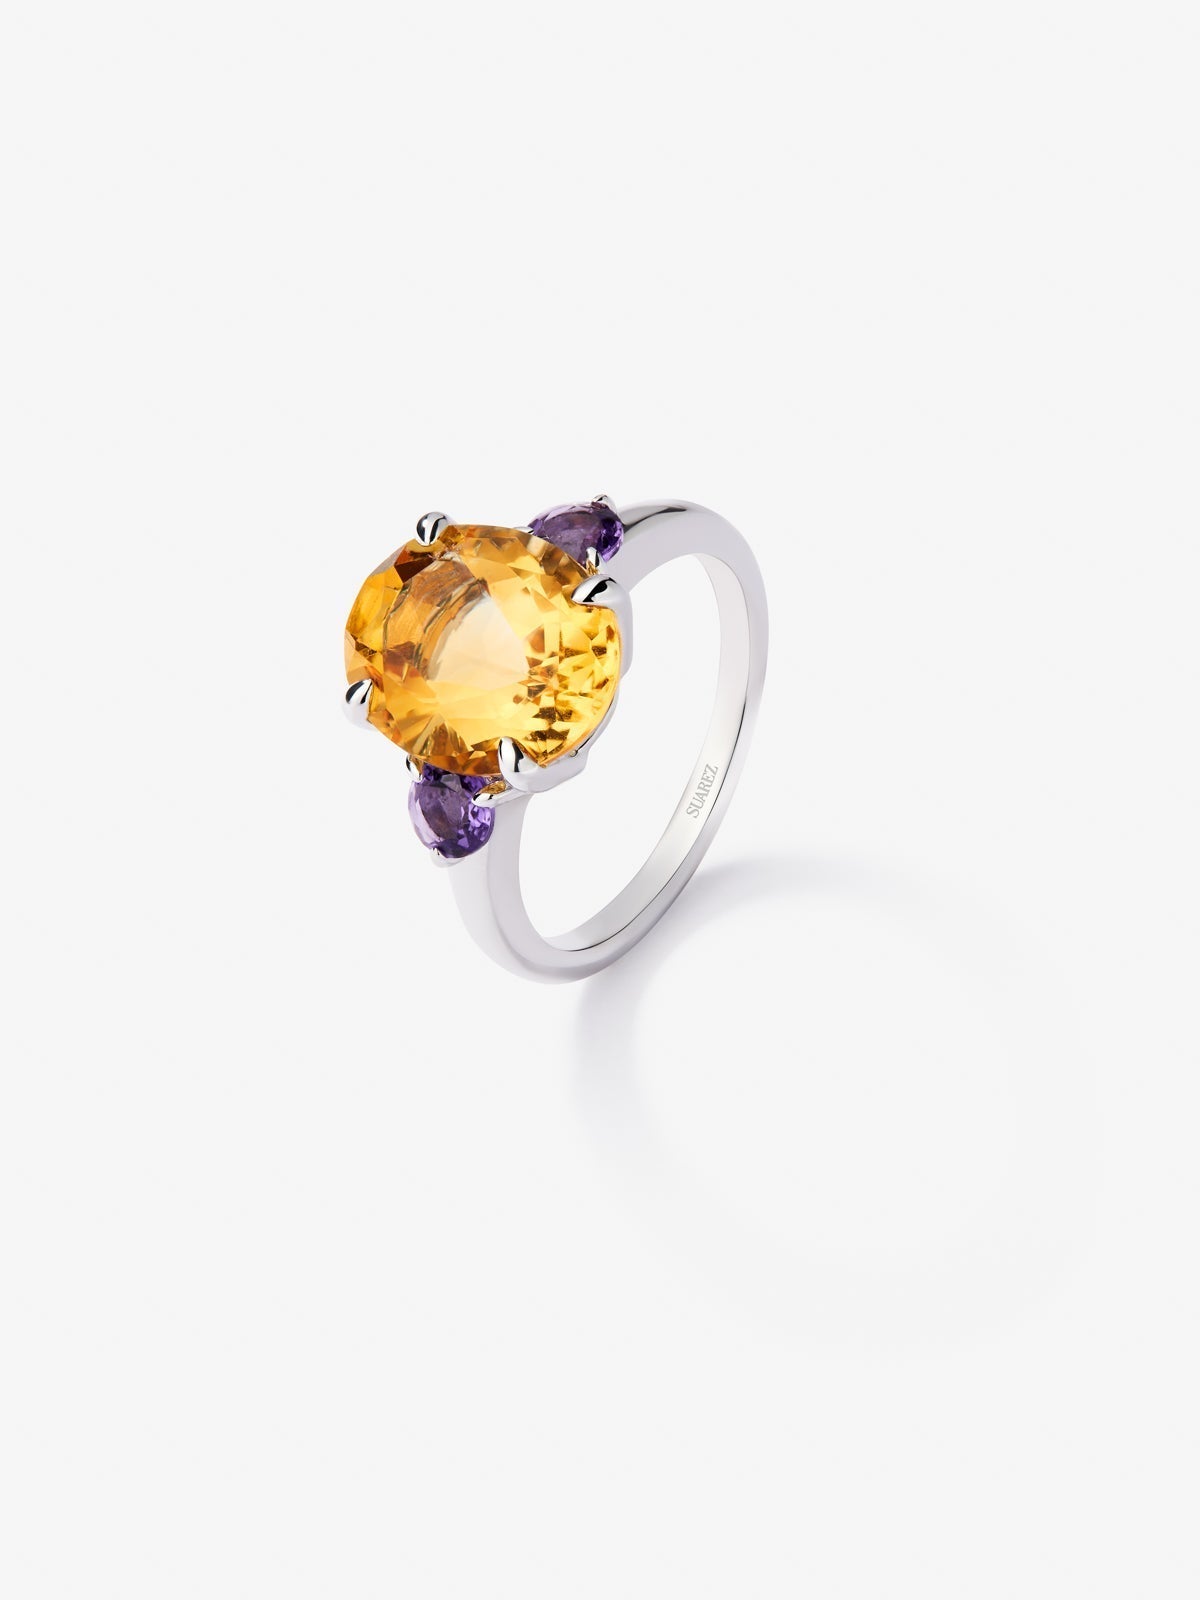 925 silver triple ring with oval-cut citrine quartz of 4.16 cts and 2 brilliant-cut purple amethysts with a total of 0.44 cts